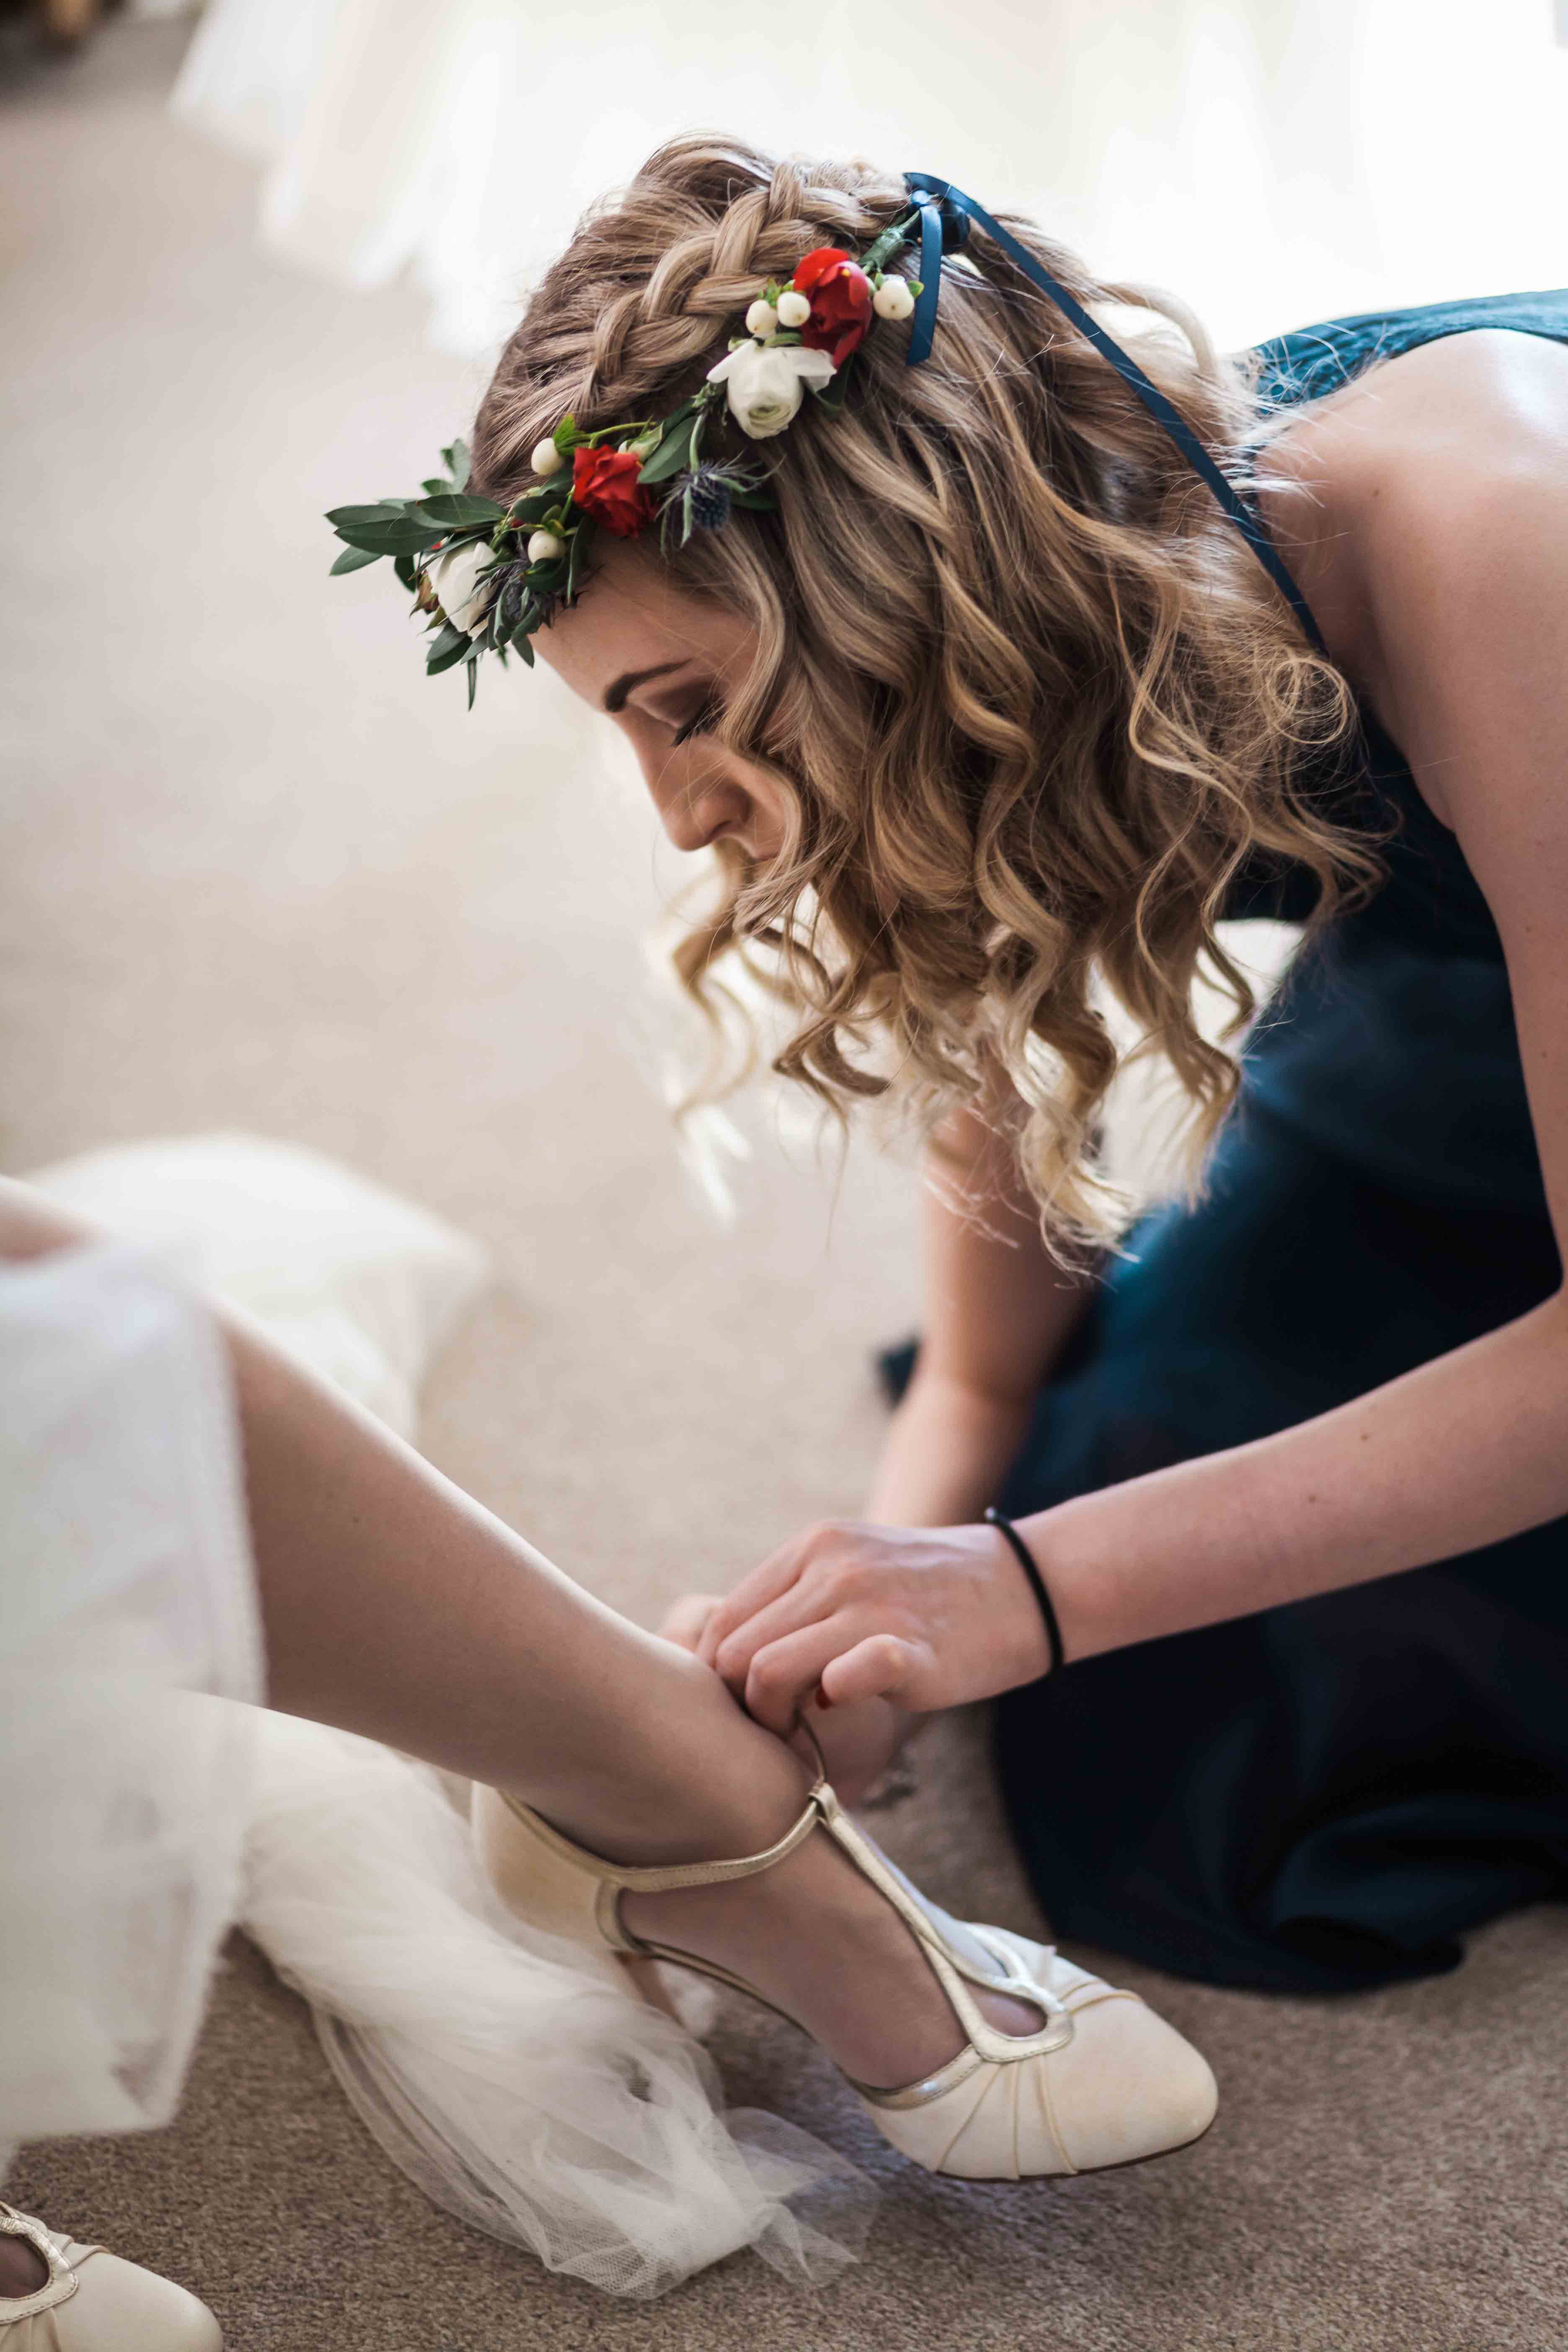 Bridesmaid with flower crown fixing brides shoe. 